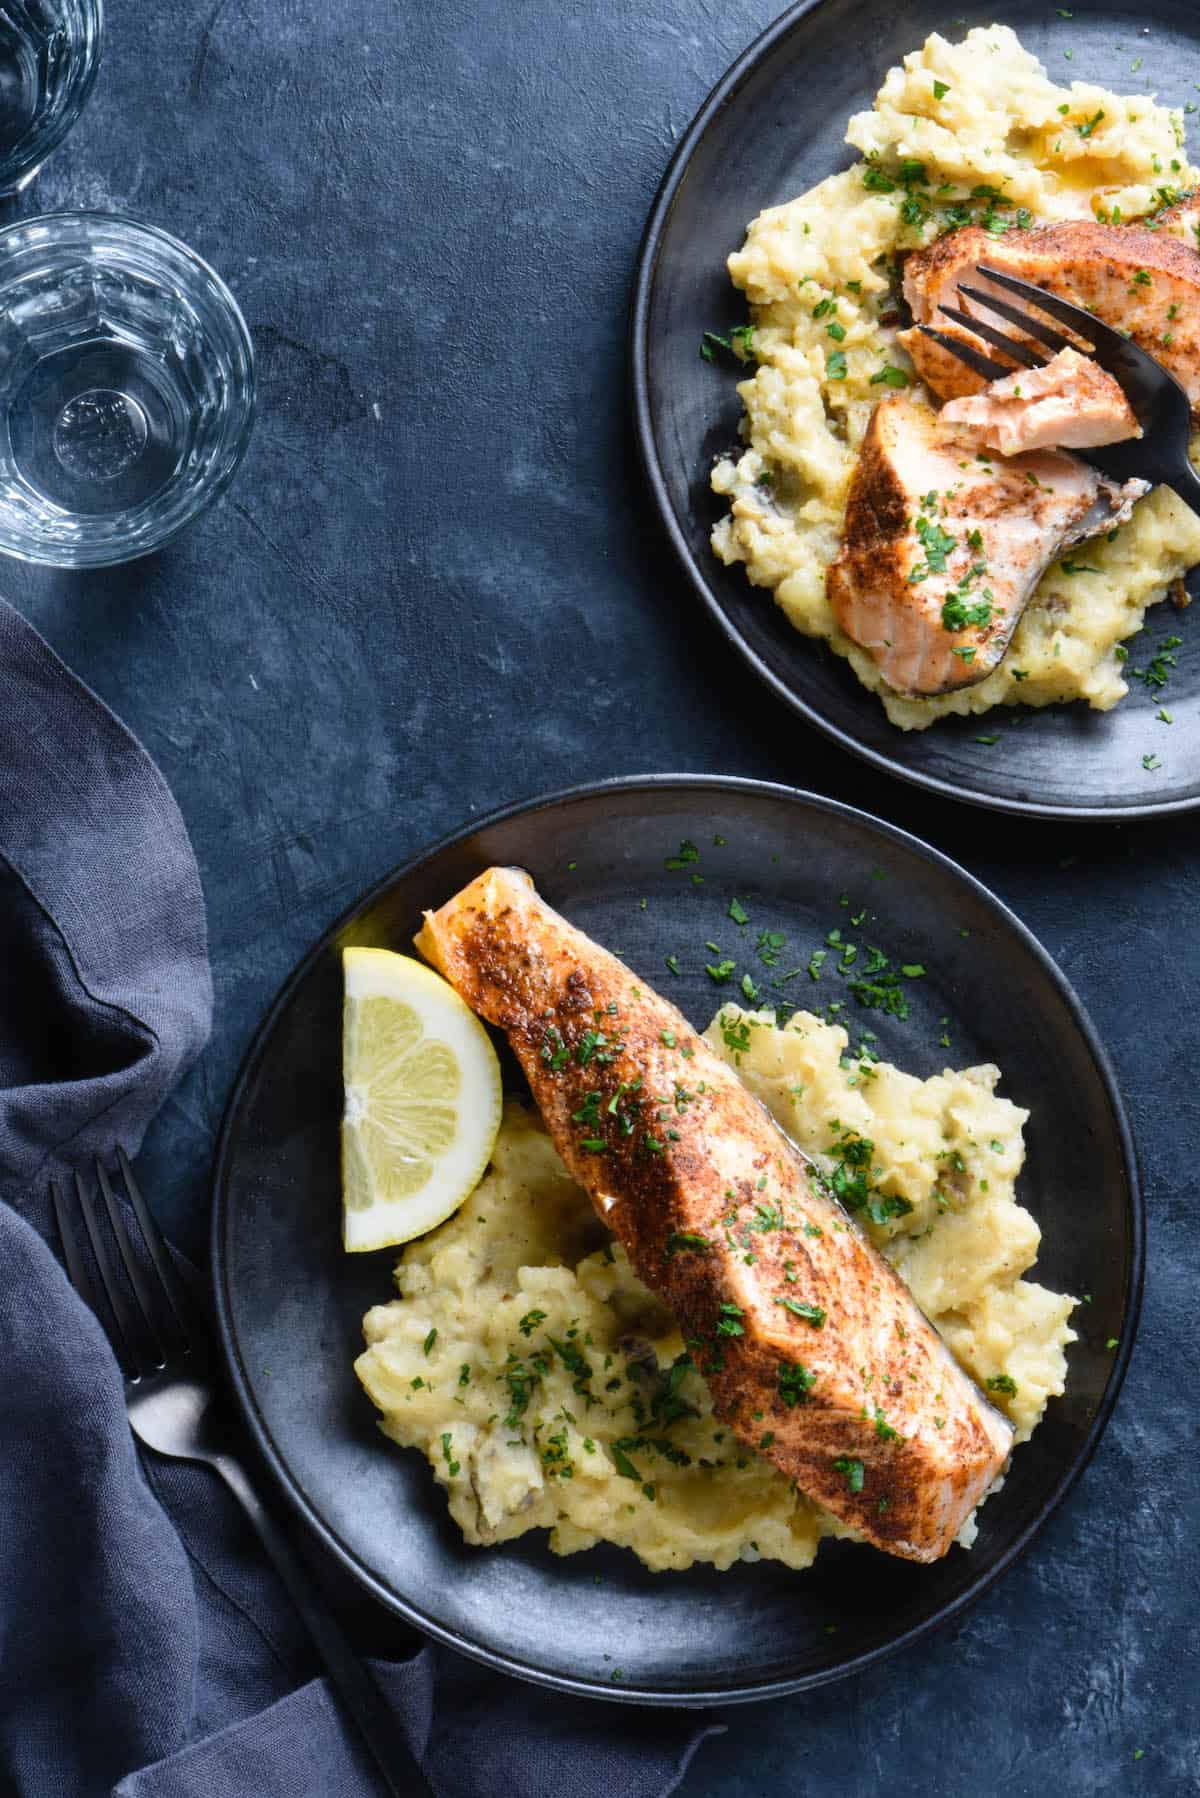 Dark background topped with two black plates. Plates are filled with instant pot salmon and mashed potatoes. Water glasses and napkin nearby.